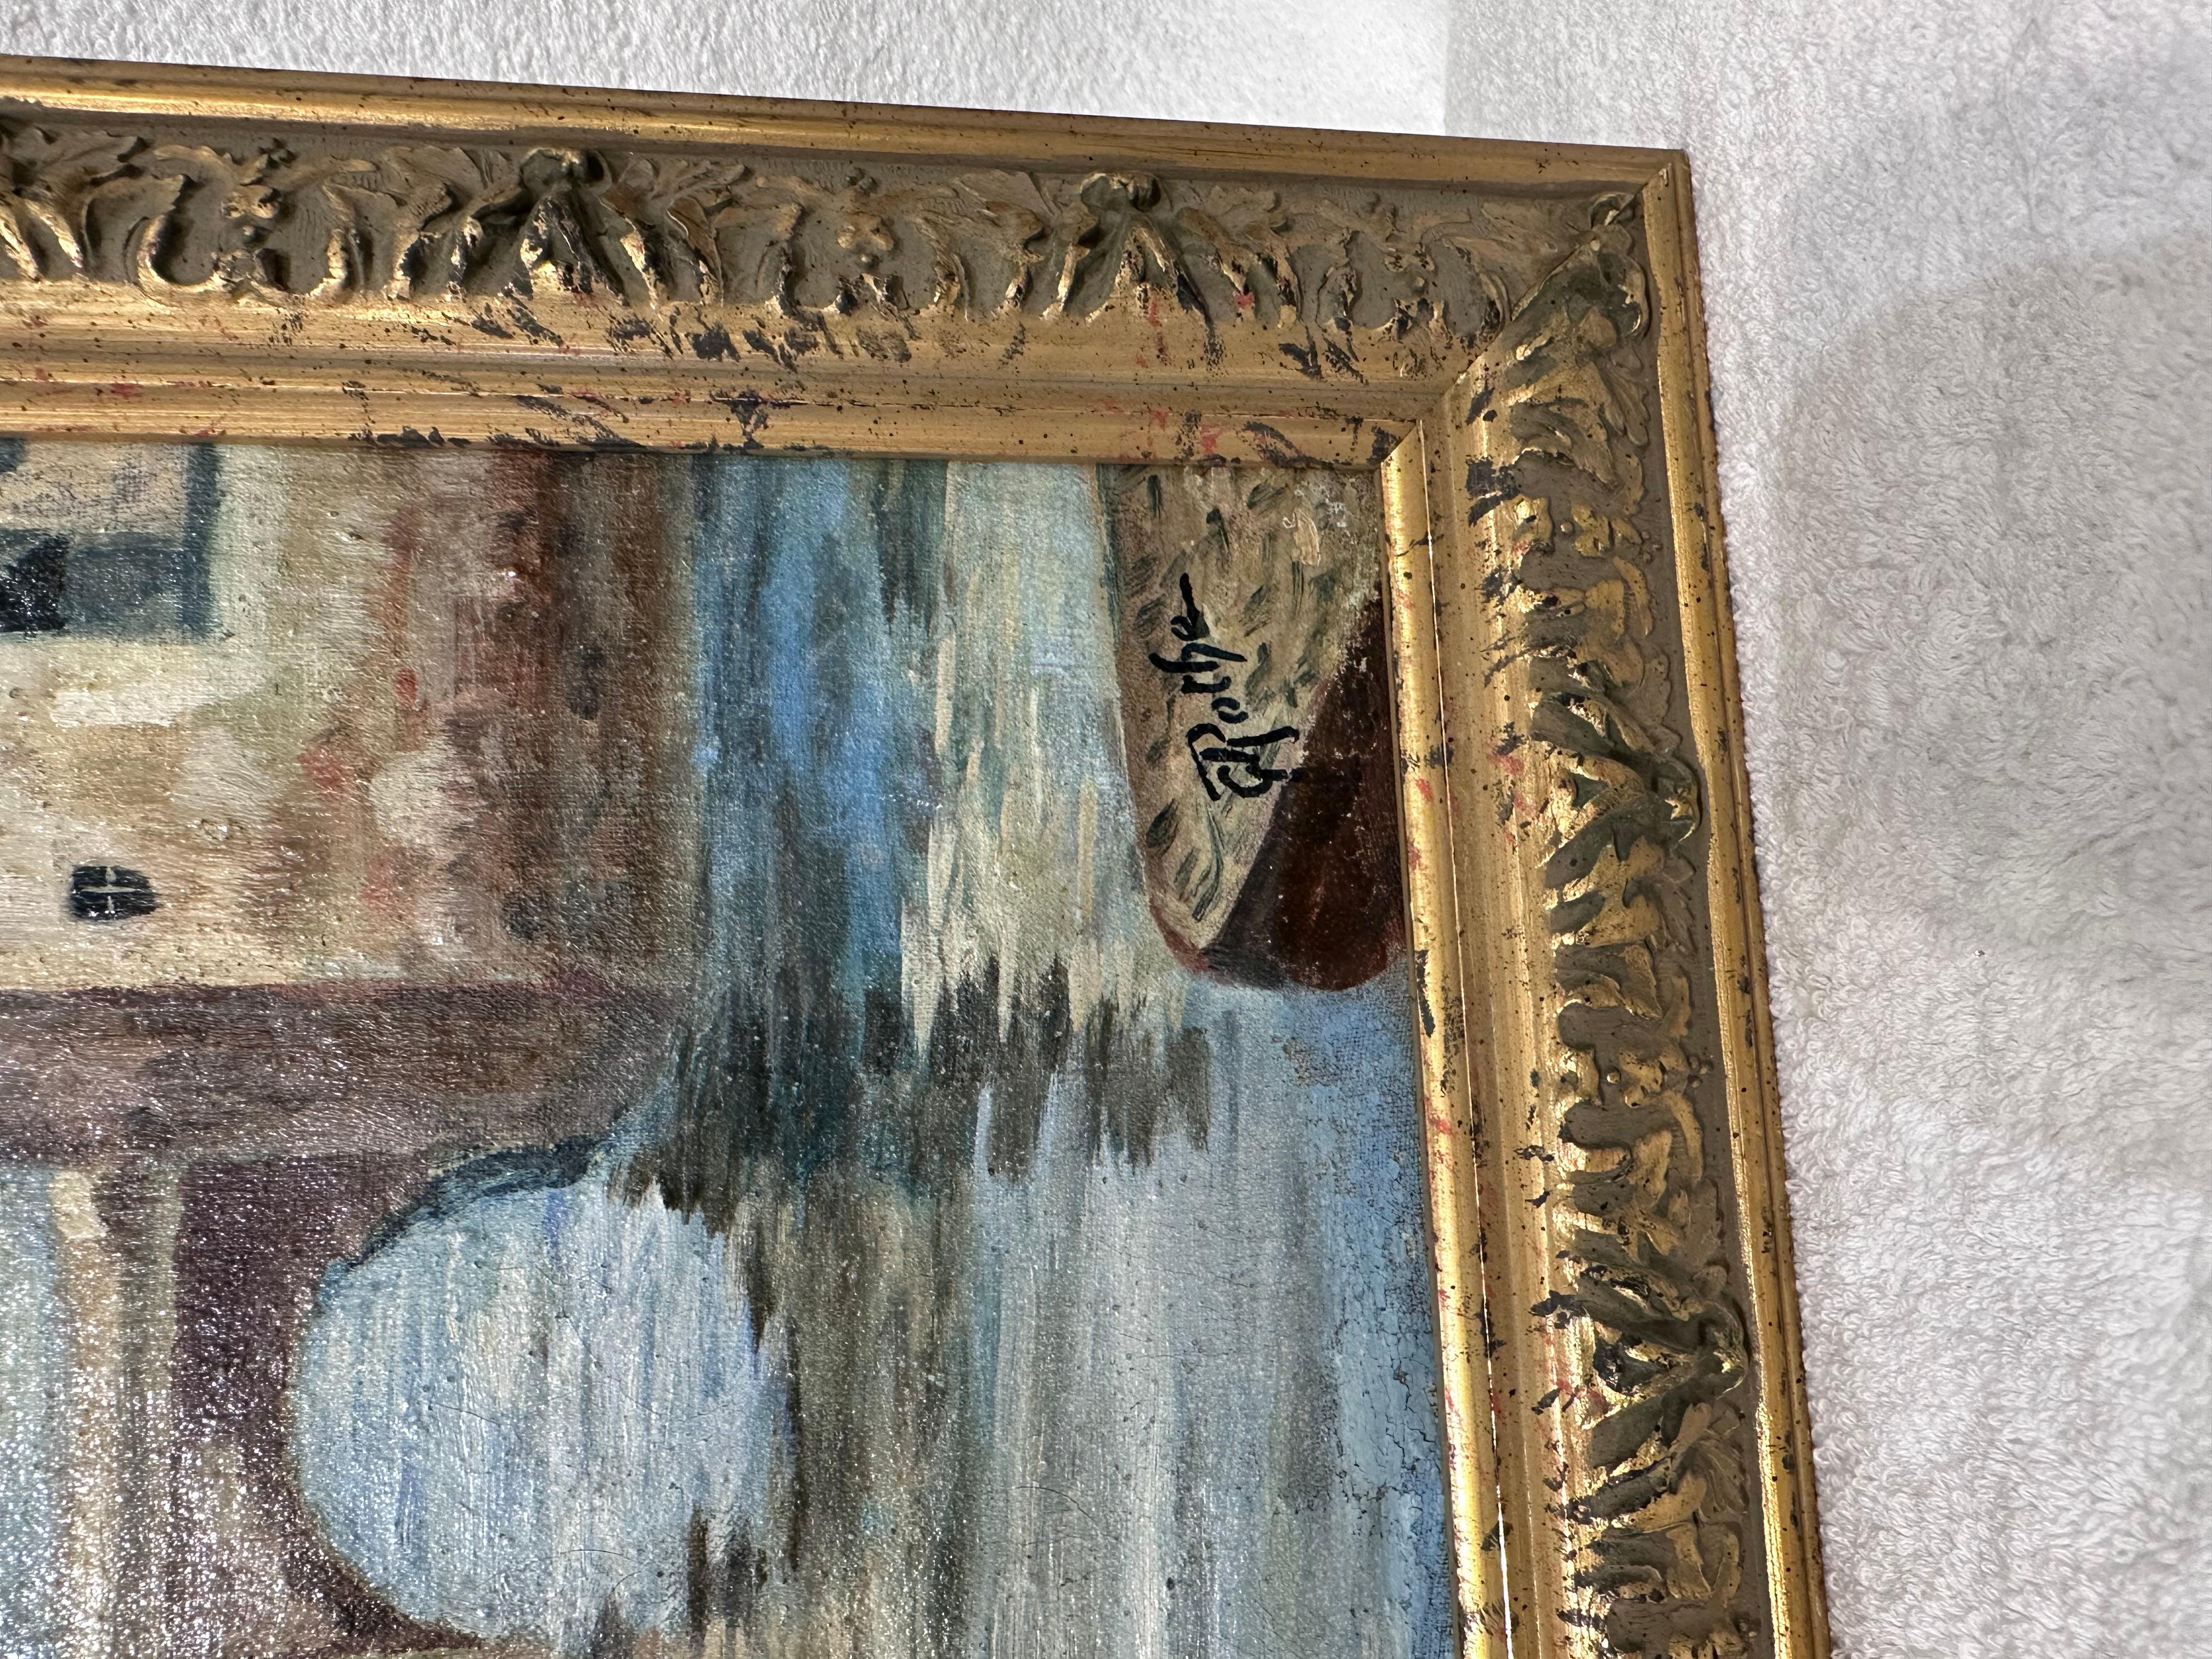 This is a beautiful original work of art depicting Venice, Italy with its beautiful color and architecture from the early 1900s. There are no repairs on this painting it shows brilliant color signed with no date.